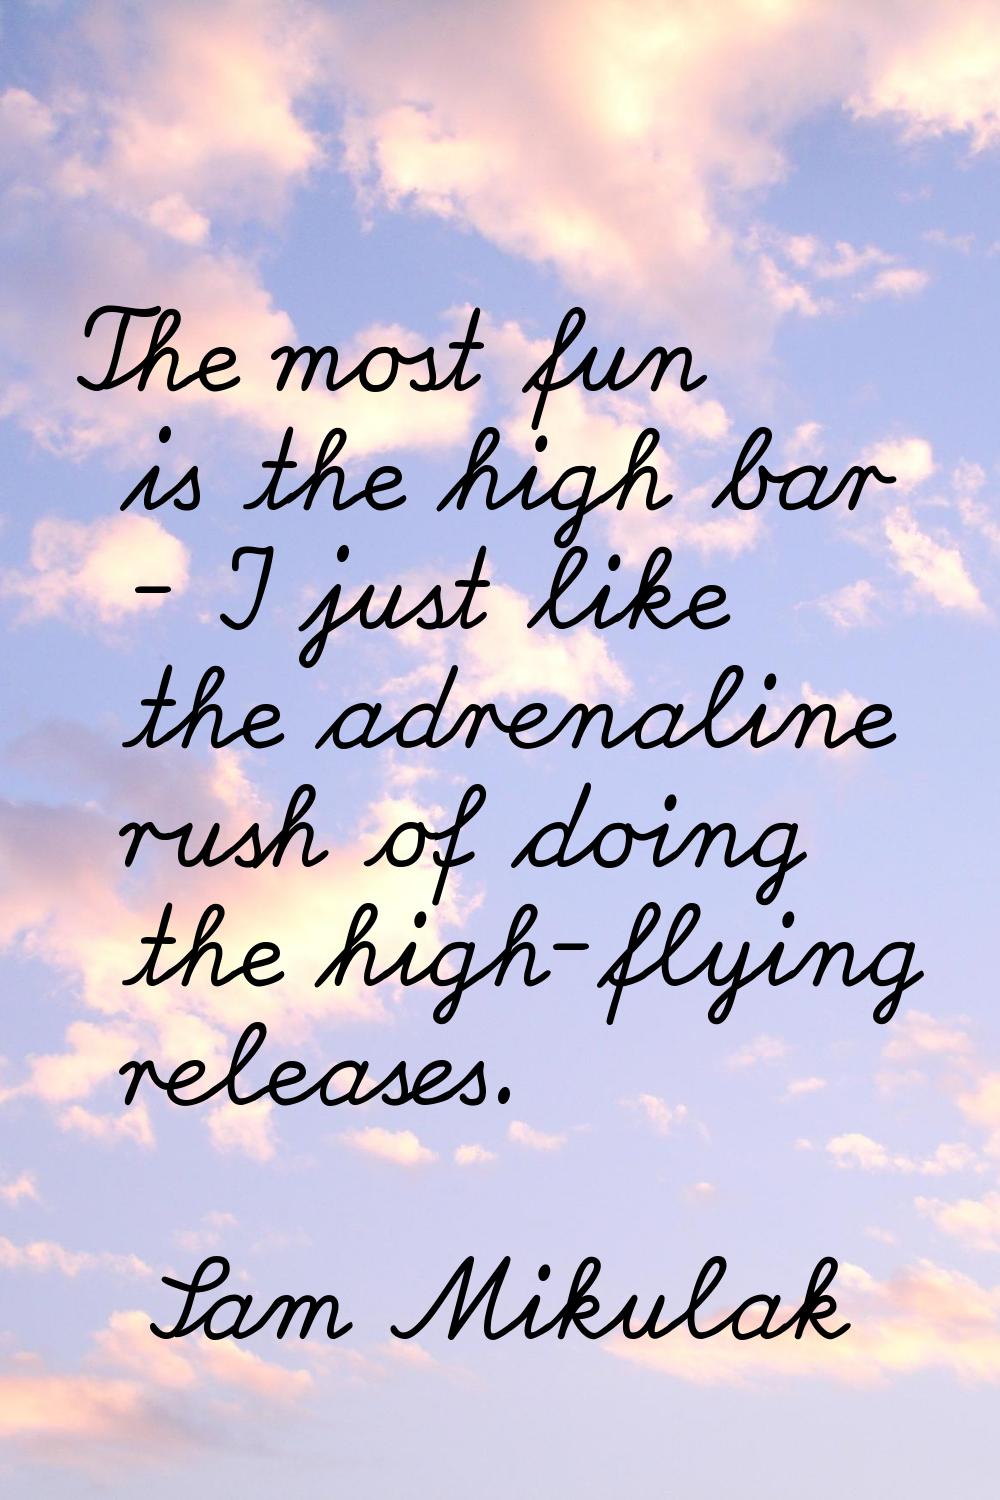 The most fun is the high bar - I just like the adrenaline rush of doing the high-flying releases.